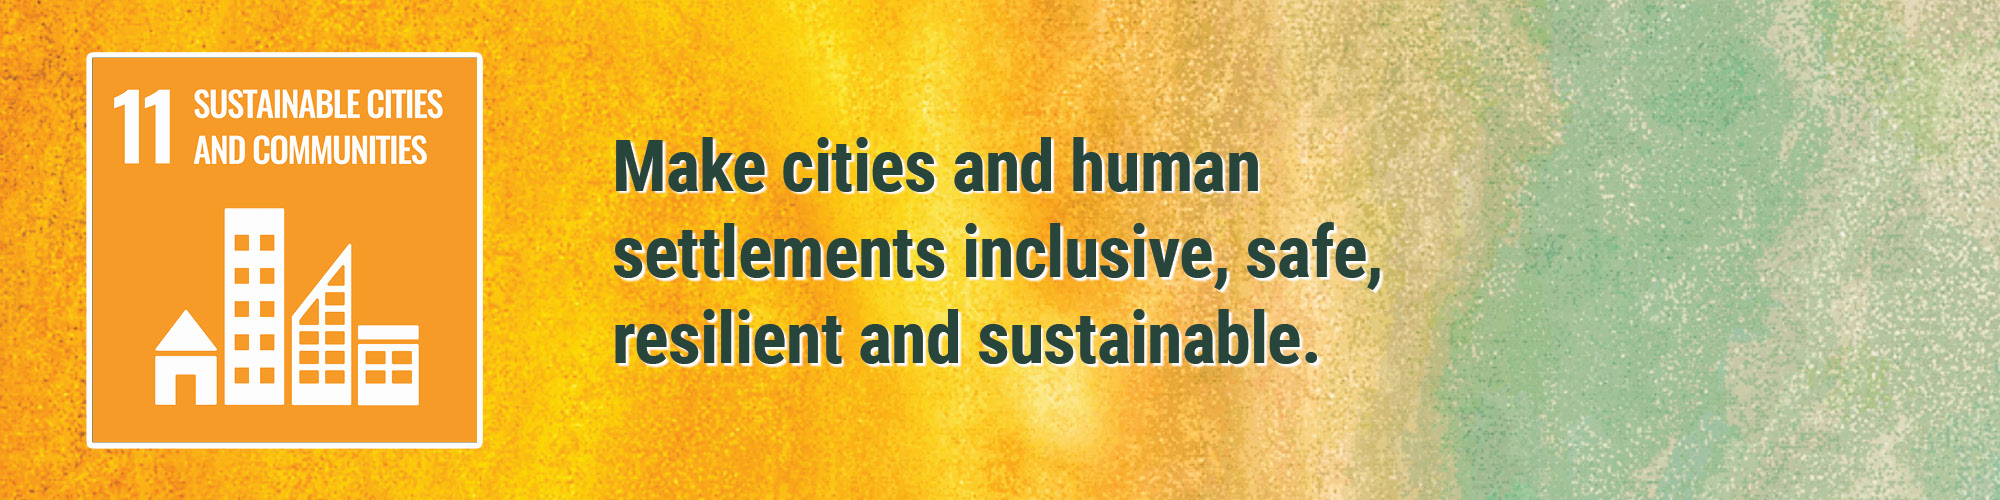 Make cities and human settlements inclusive, safe, resilient and sustainable.